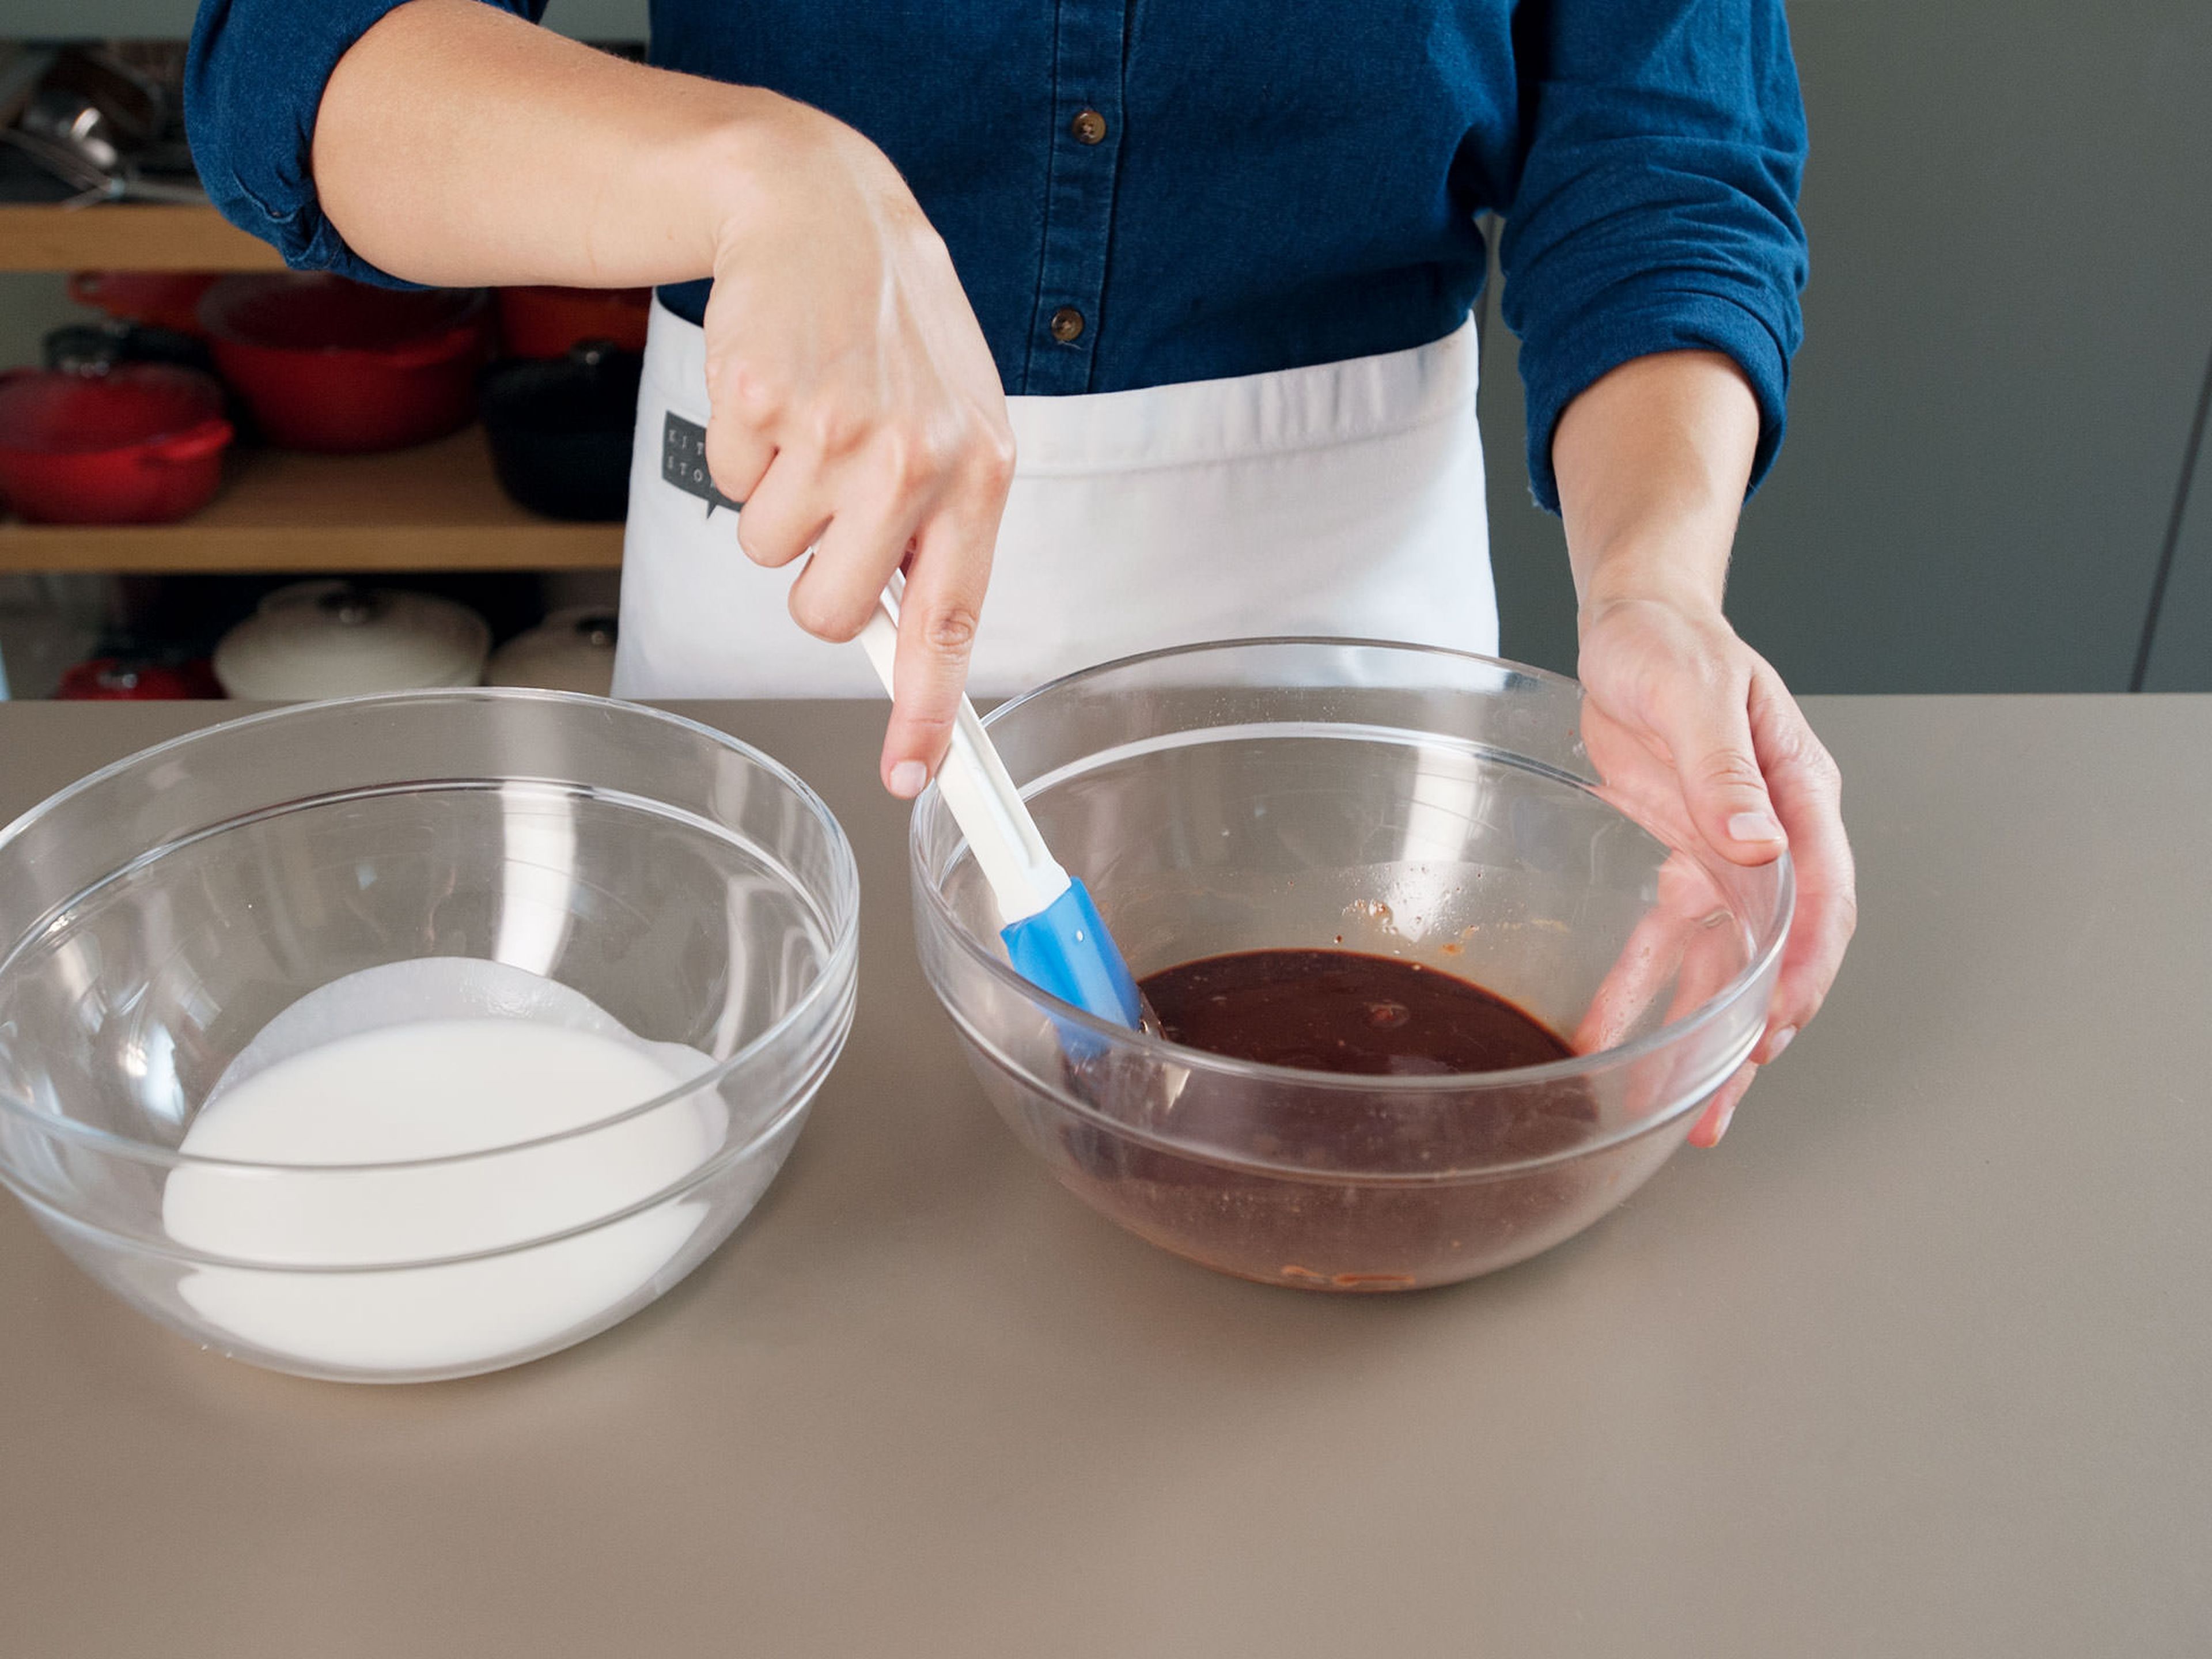 For the icing, stir together confectioner's sugar and hot water until smooth; if needed, add more water a tbsp. at a time until desired consistency is reached. Melt chocolate in a bowl set over simmering water, then remove from heat. Add half of the icing to melted chocolate along with cocoa powder. Add some water, if needed, a tbsp. at a time.